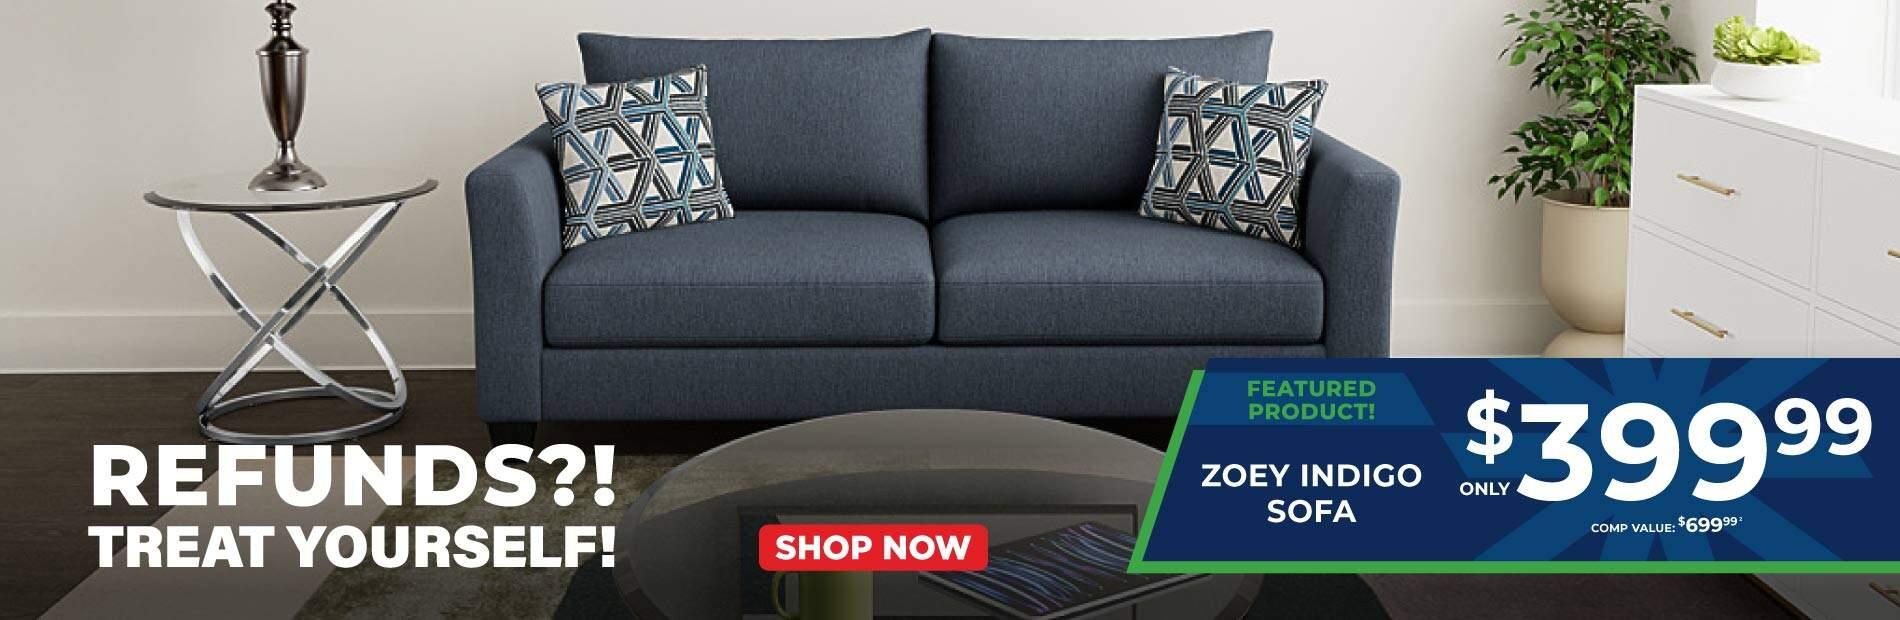 Refunds?! Treat Yourself! Featured Product! Zoey Indigo Sofa Only $399.99. Comp Value: $699.99 2 Shop Now